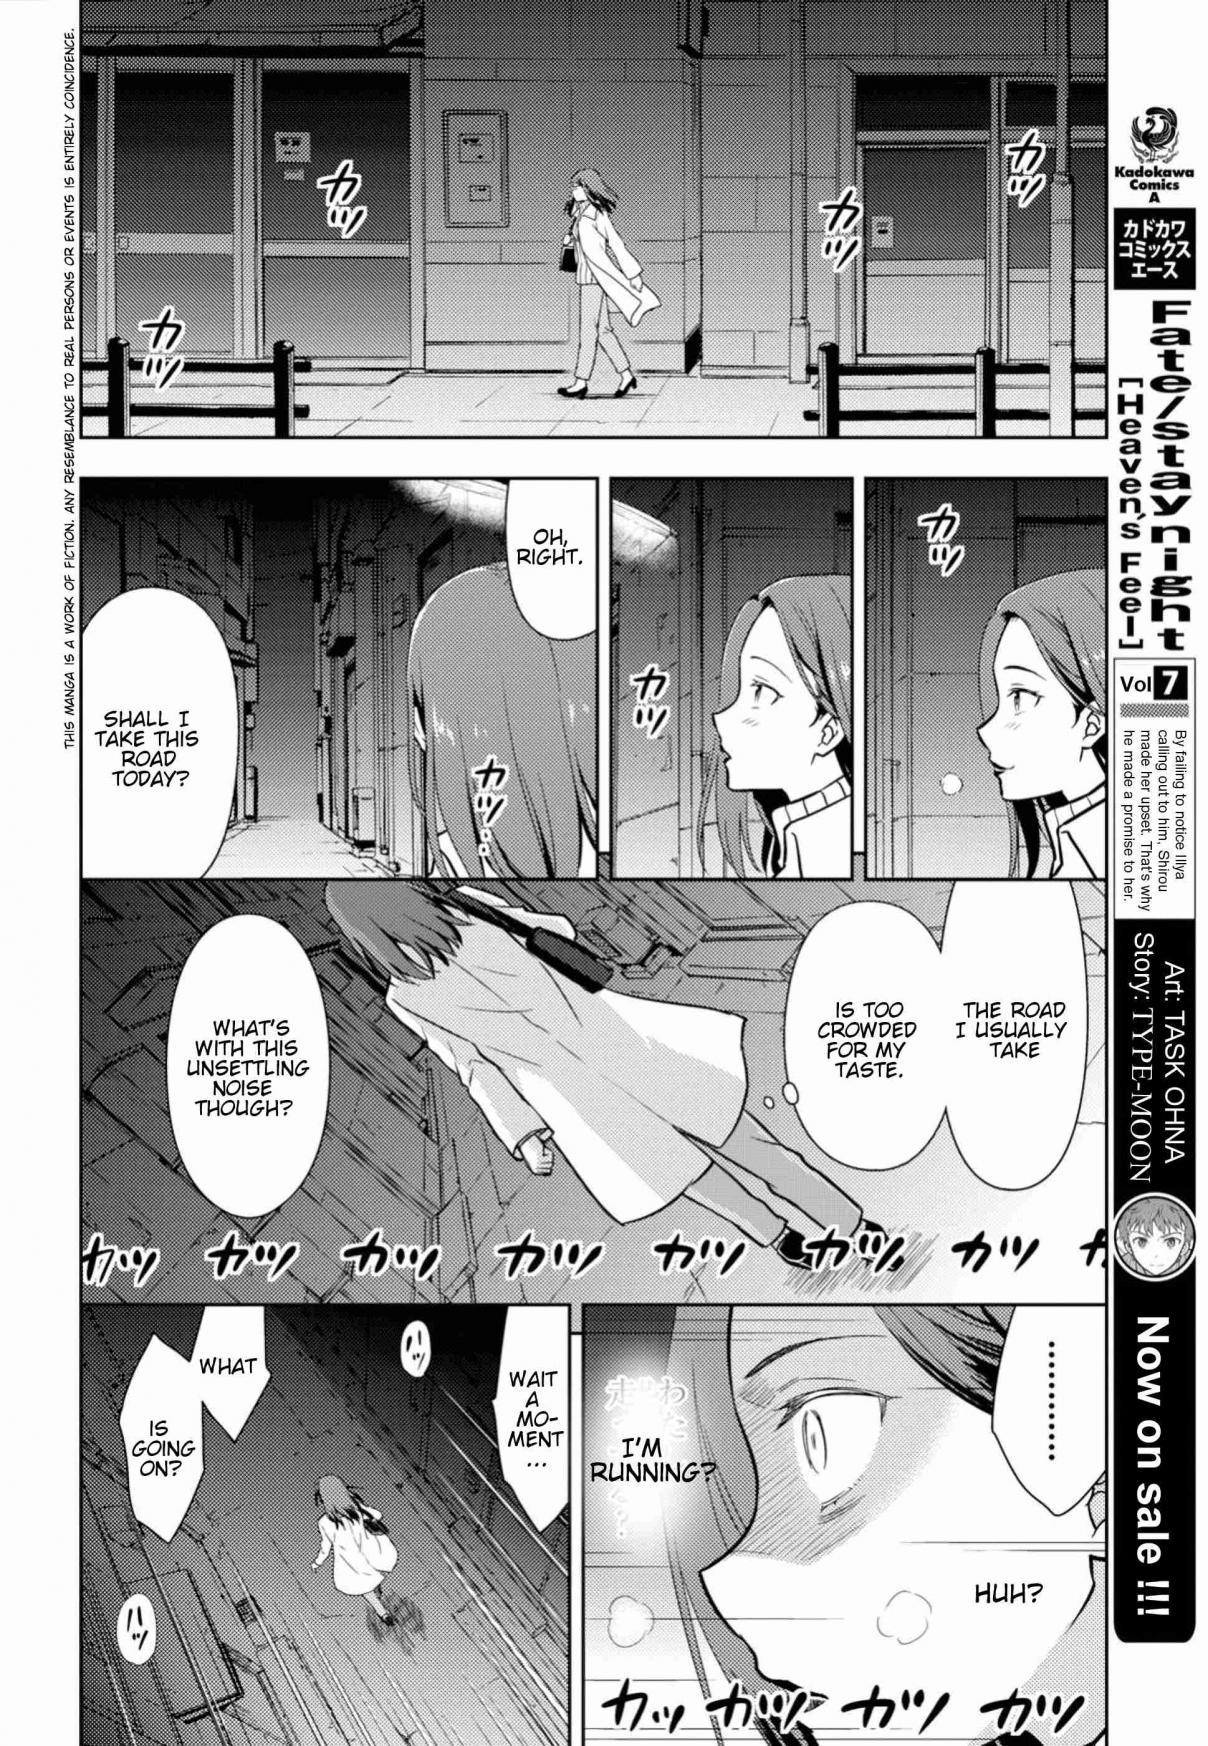 Fate/stay night: Heaven's Feel Vol. 8 Ch. 46 Day 7 / Madness (1)